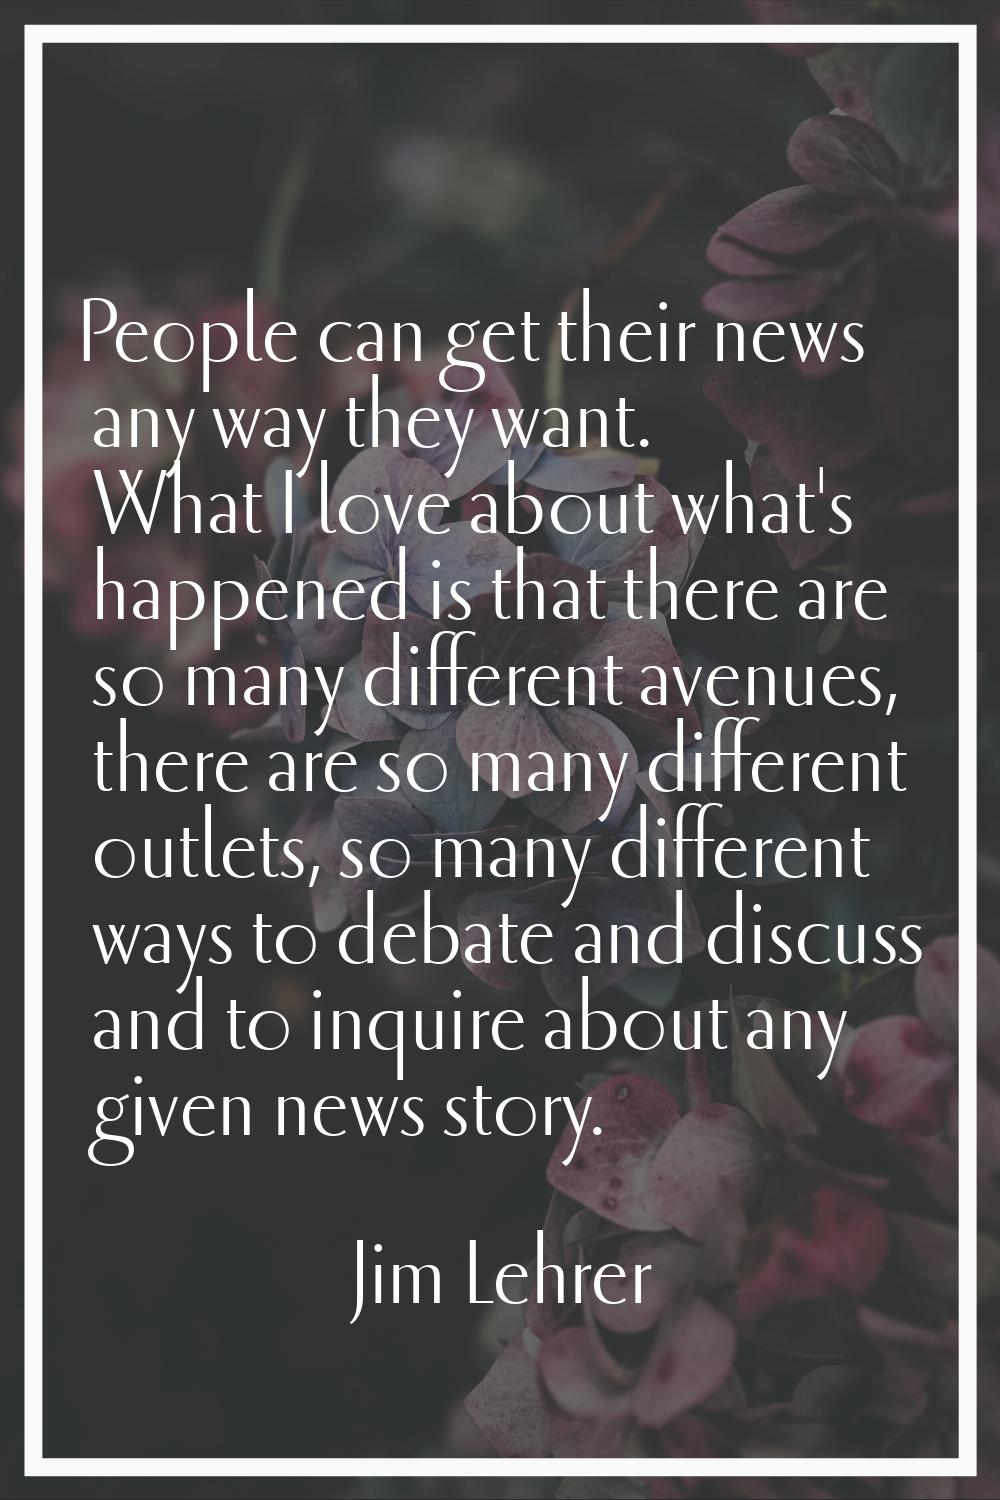 People can get their news any way they want. What I love about what's happened is that there are so